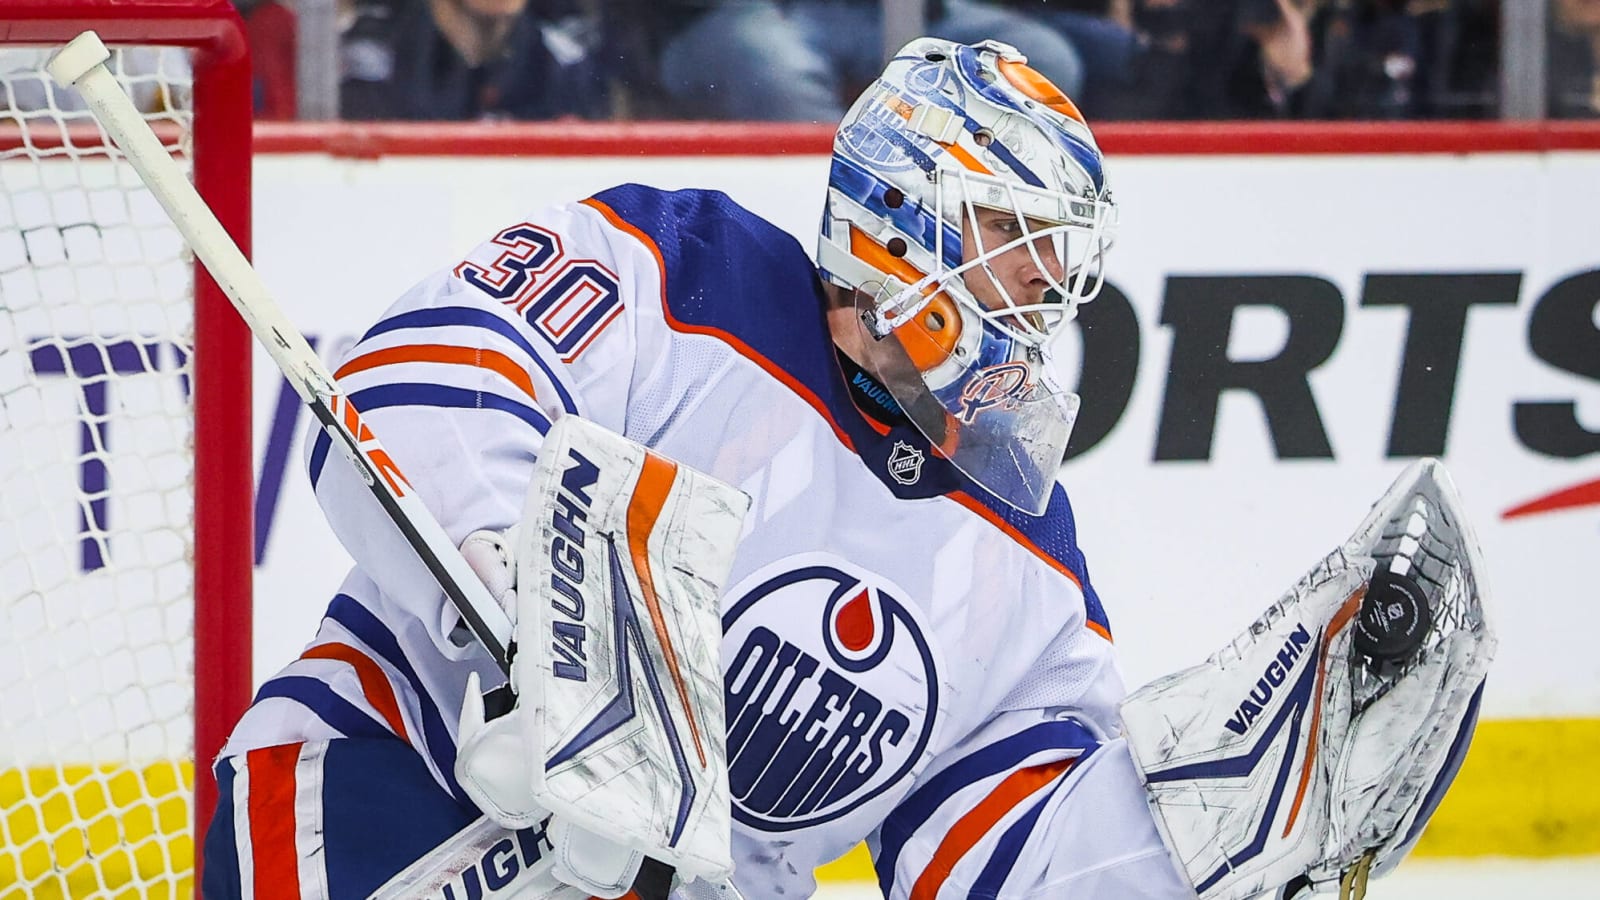 Oilers win season series against the Flames with 4-2 victory at the Saddledome